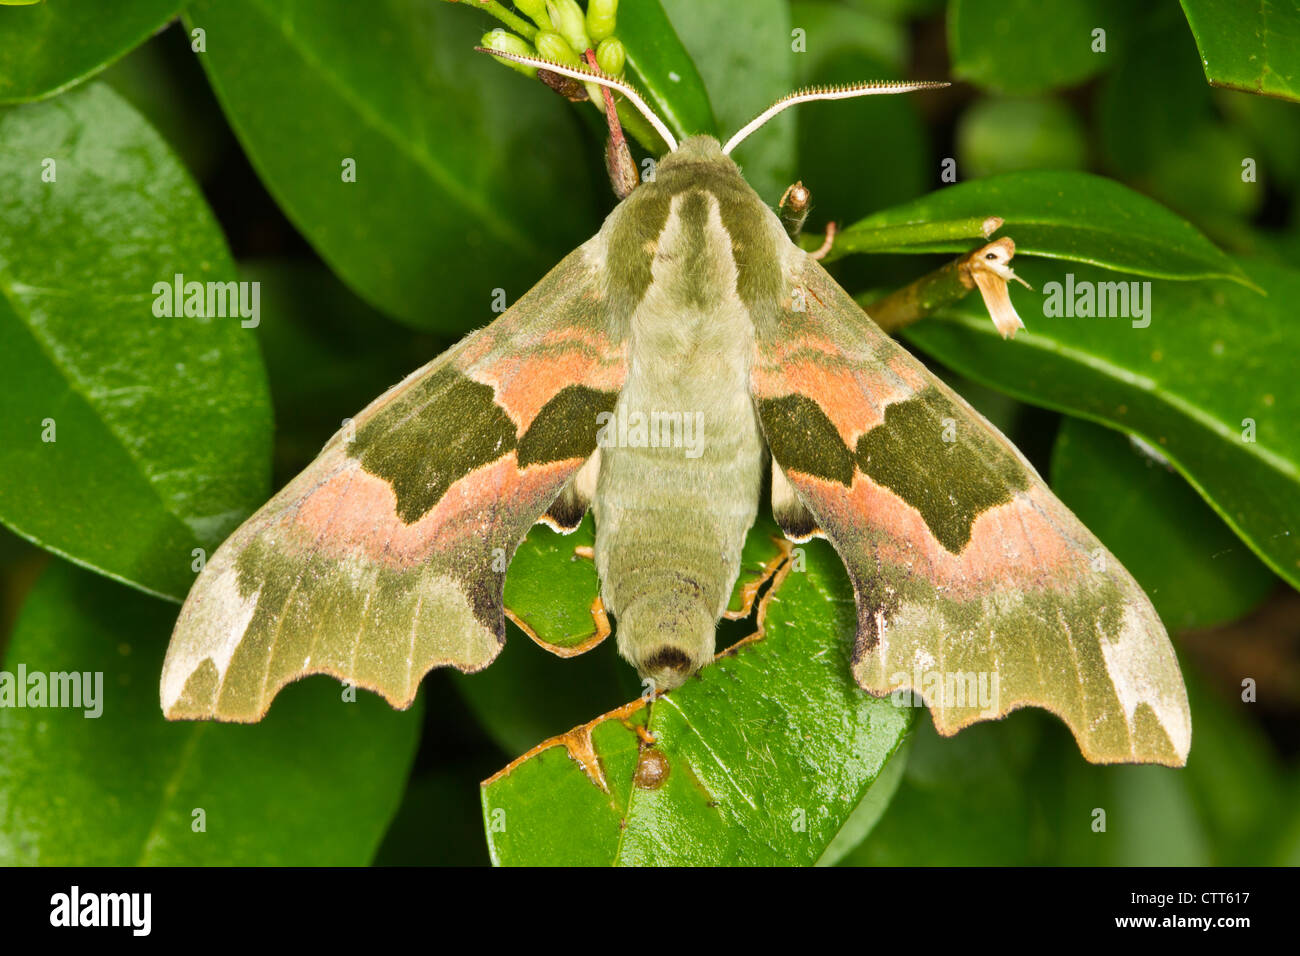 Lime Hawkmoth (Mimas tiliae) resting on leaves Stock Photo